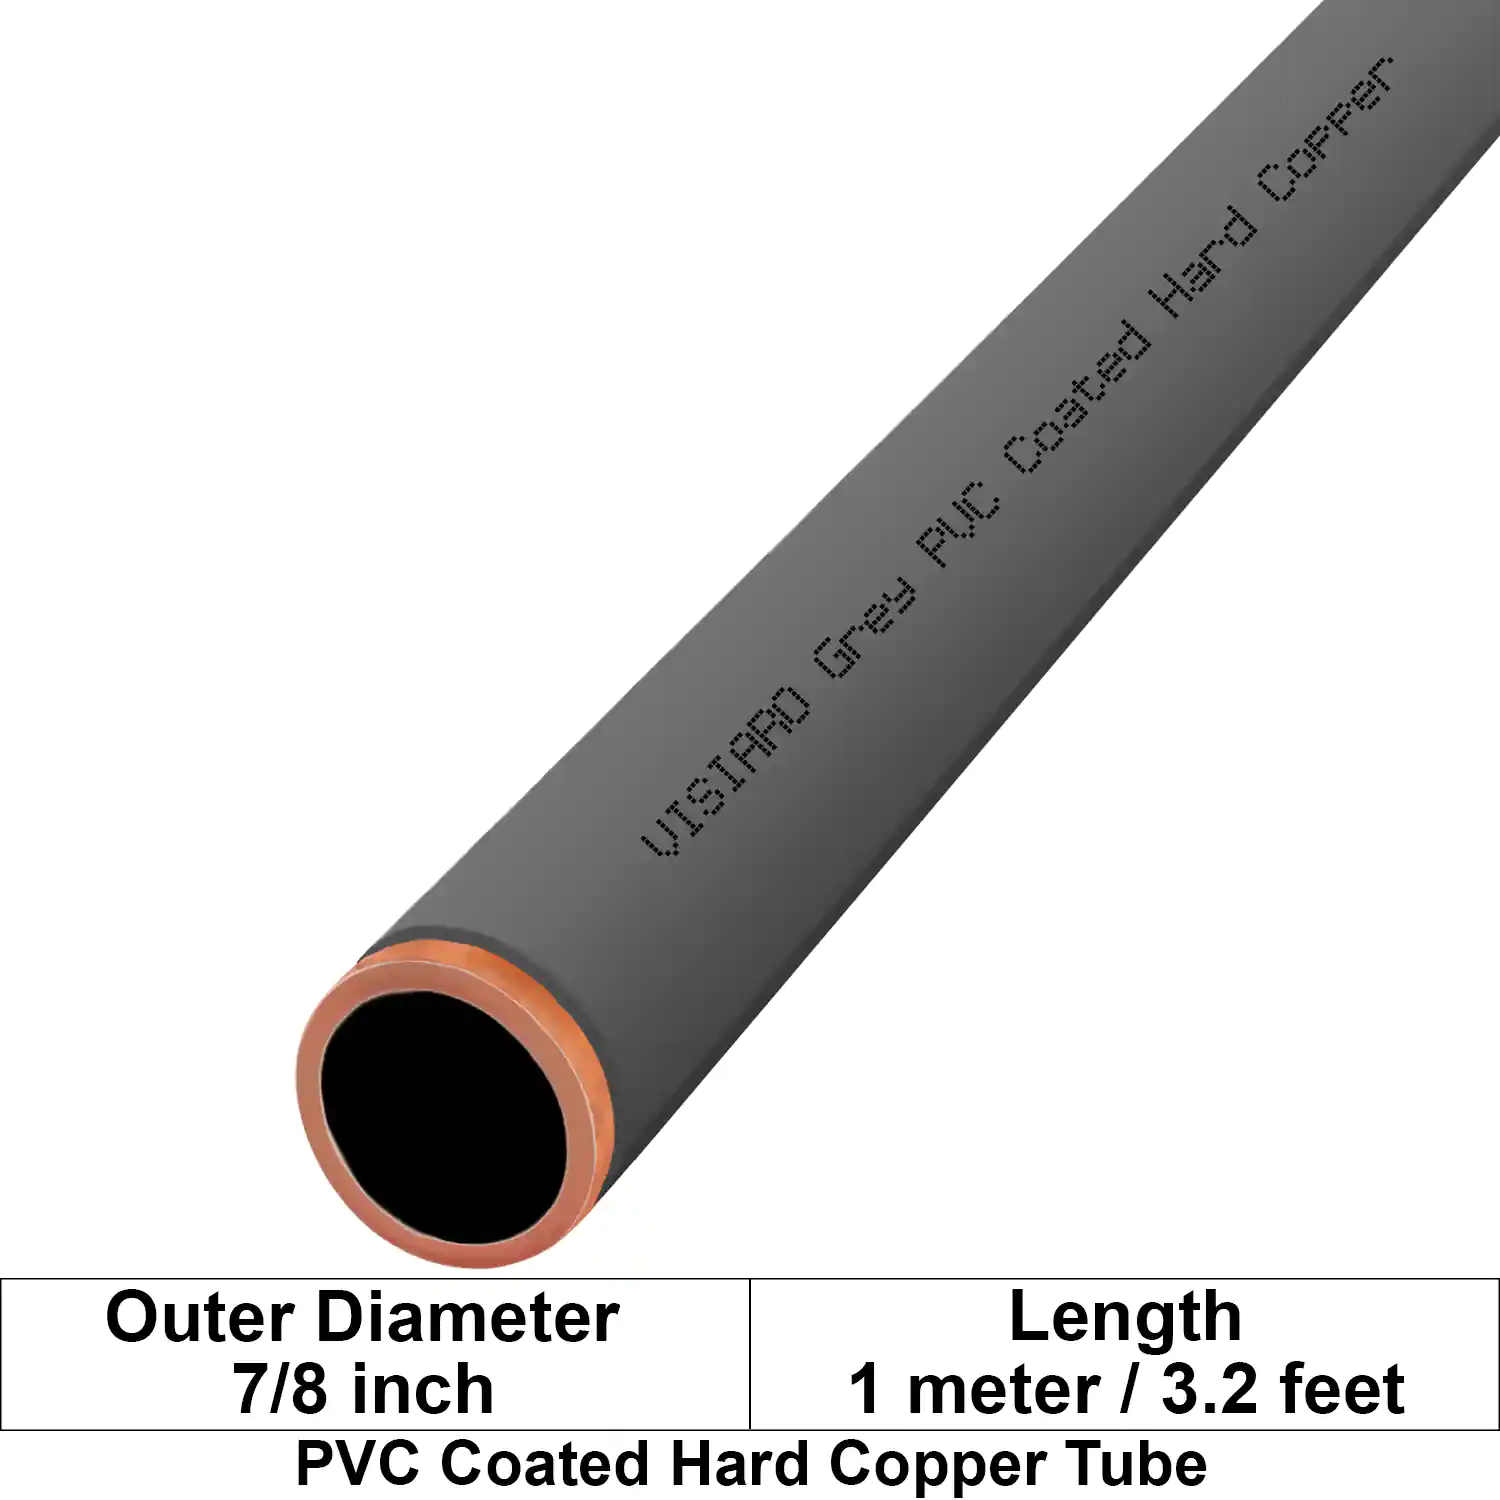 Visiaro Grey PVC Coated Hard Copper Tube 1mtr long Outer Diameter - 7/8 inch